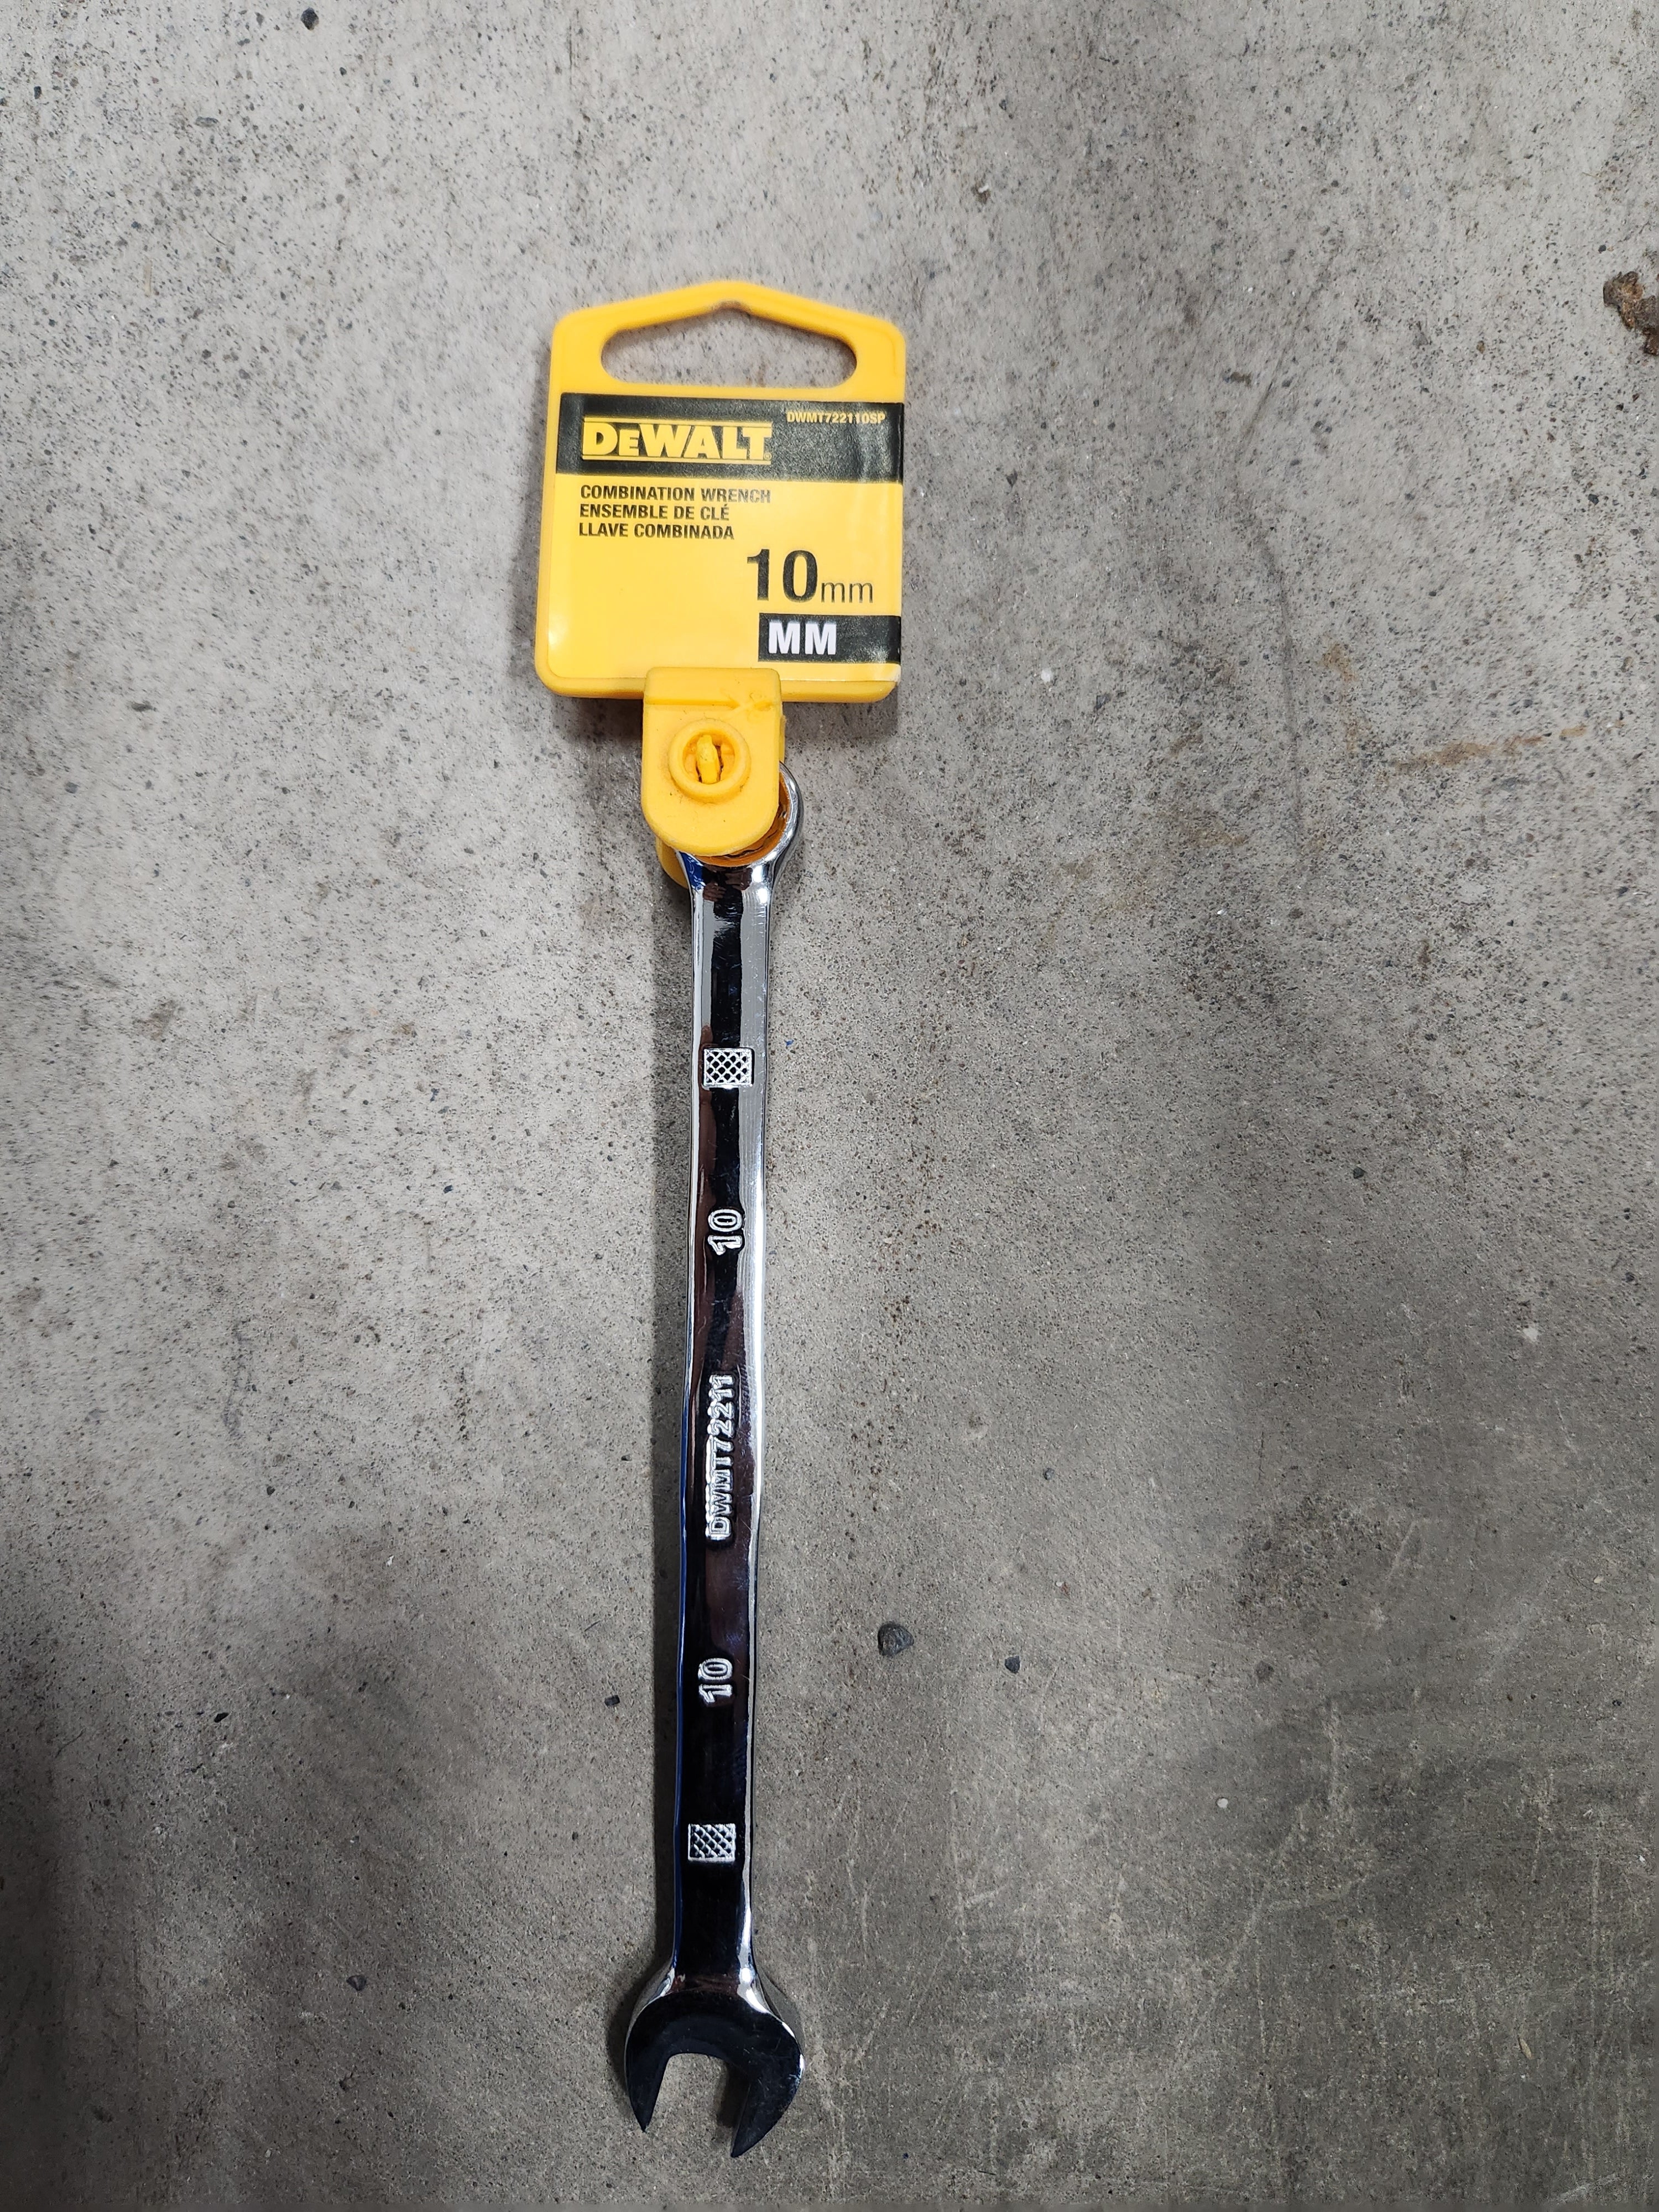 Dewalt Combination Wrenches (MM - Metric)